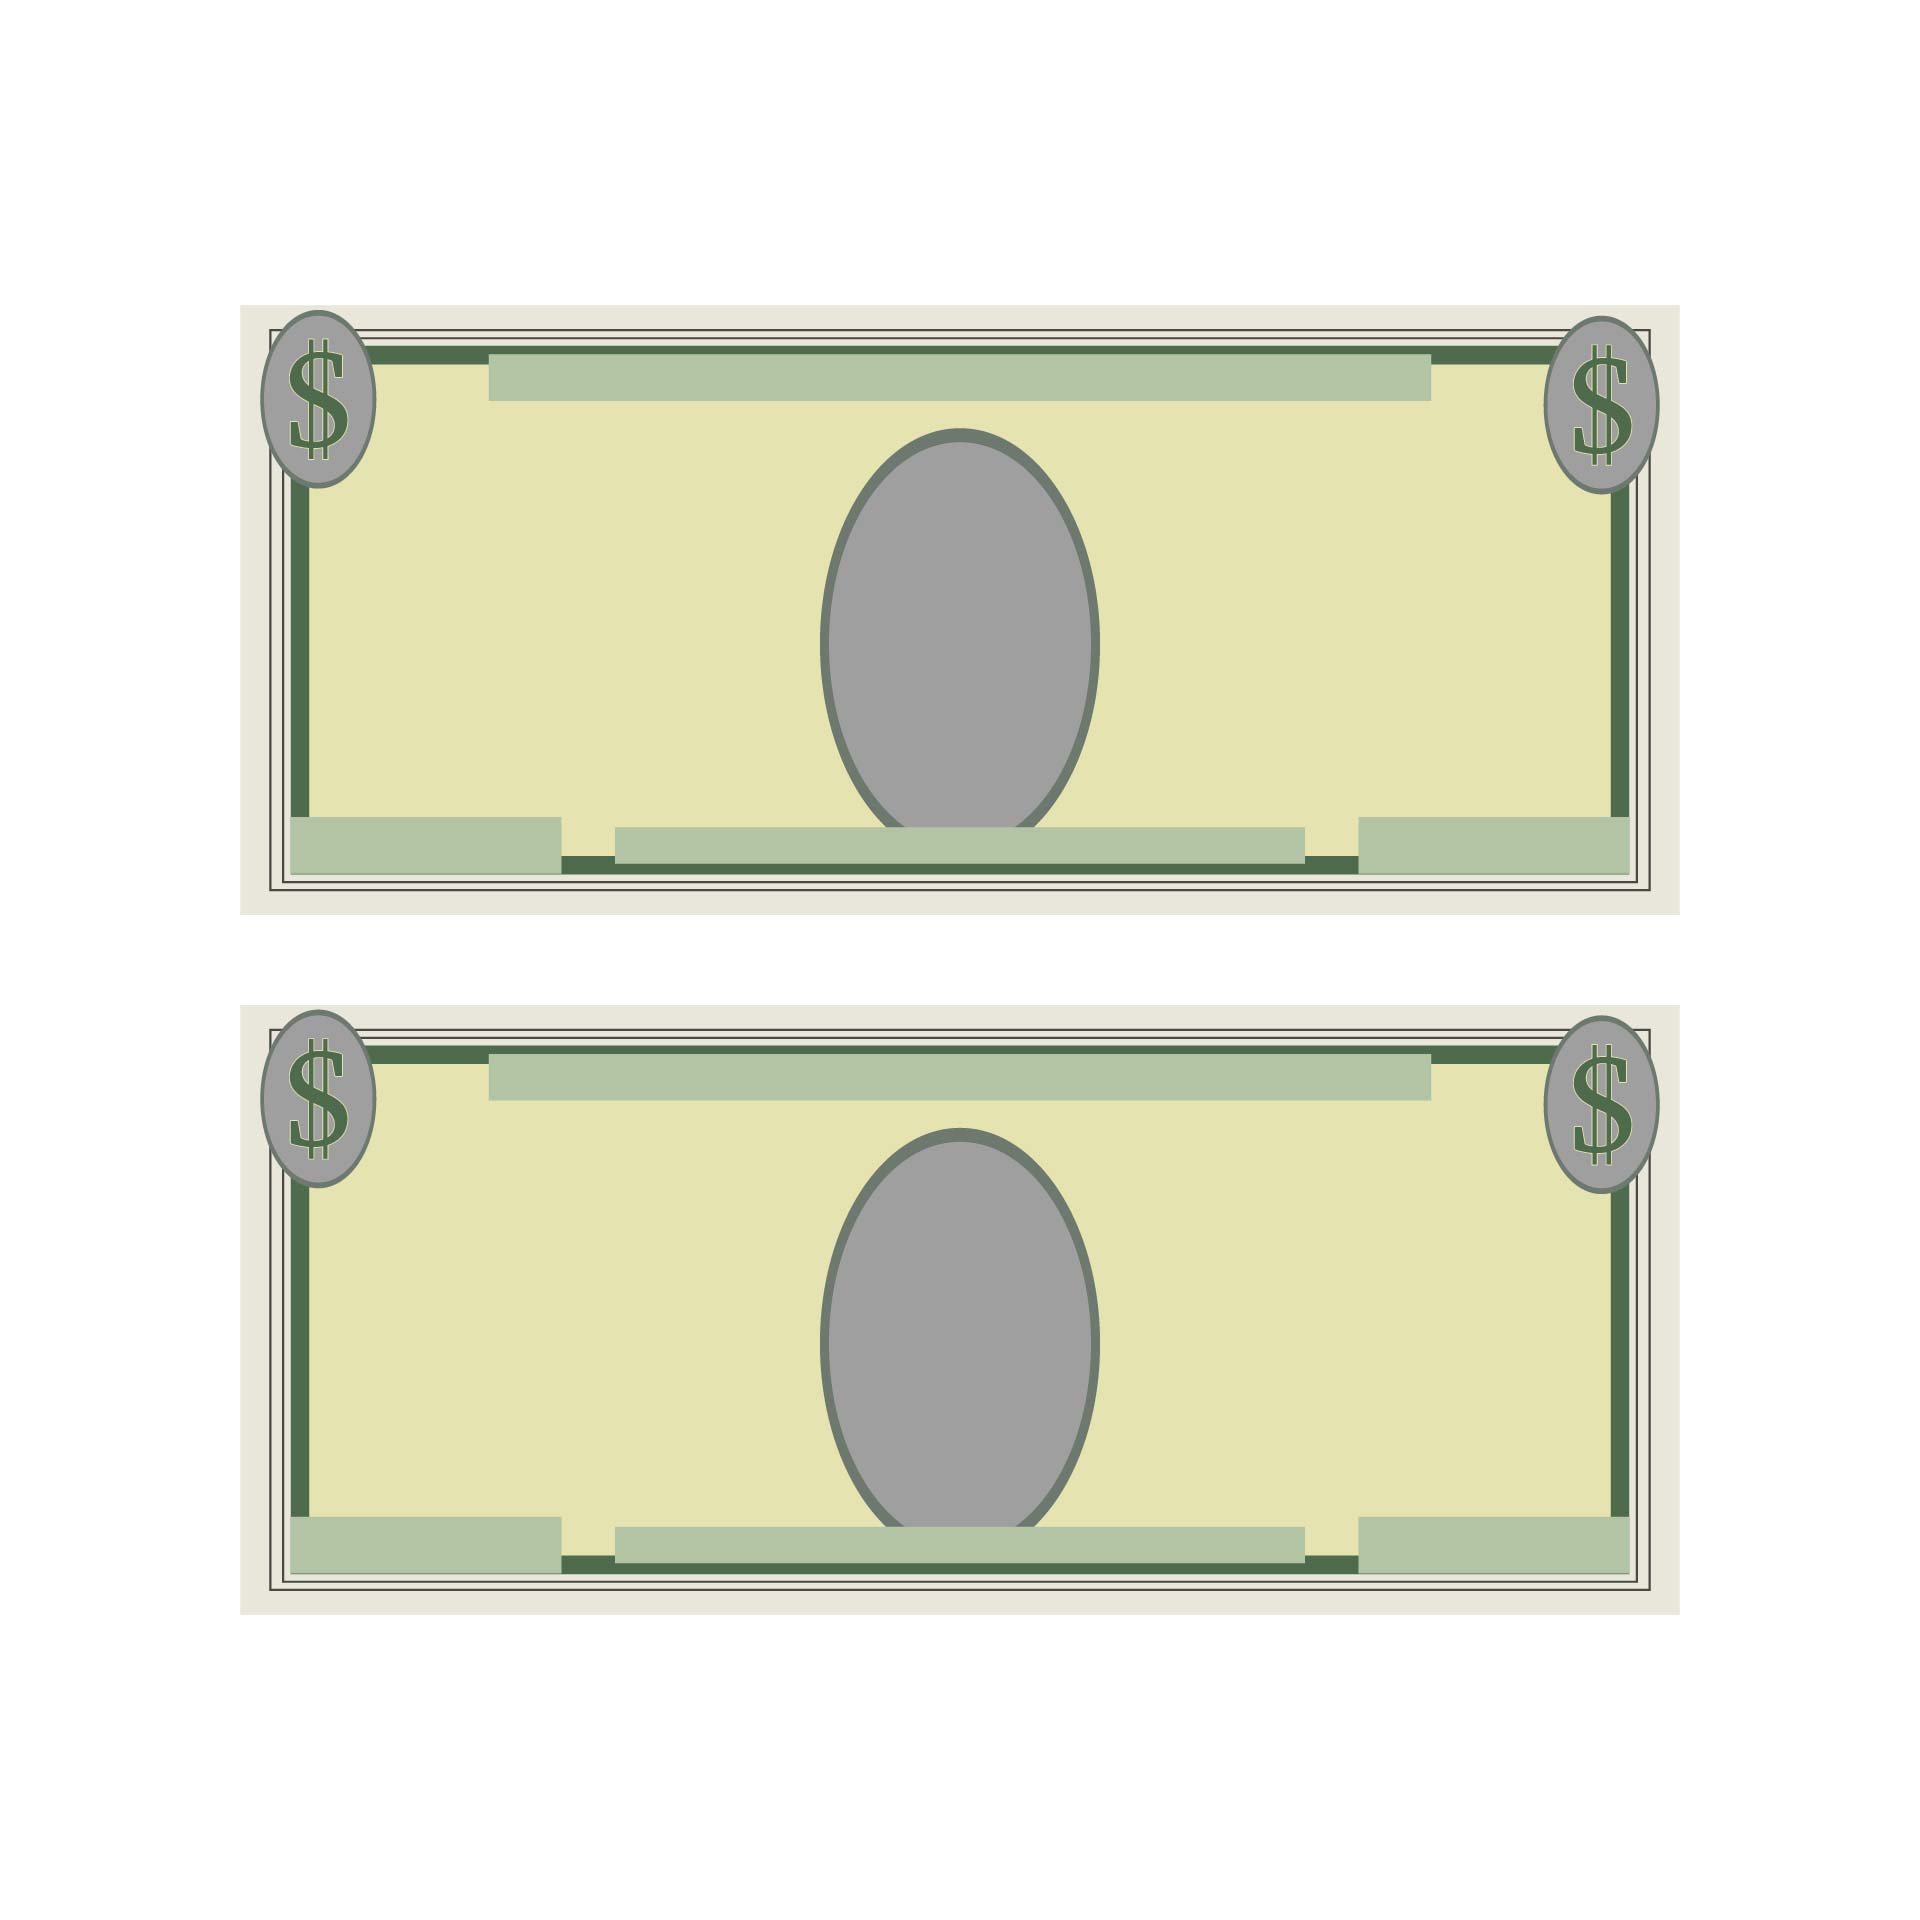 7-best-images-of-printable-play-money-actual-size-free-printable-play